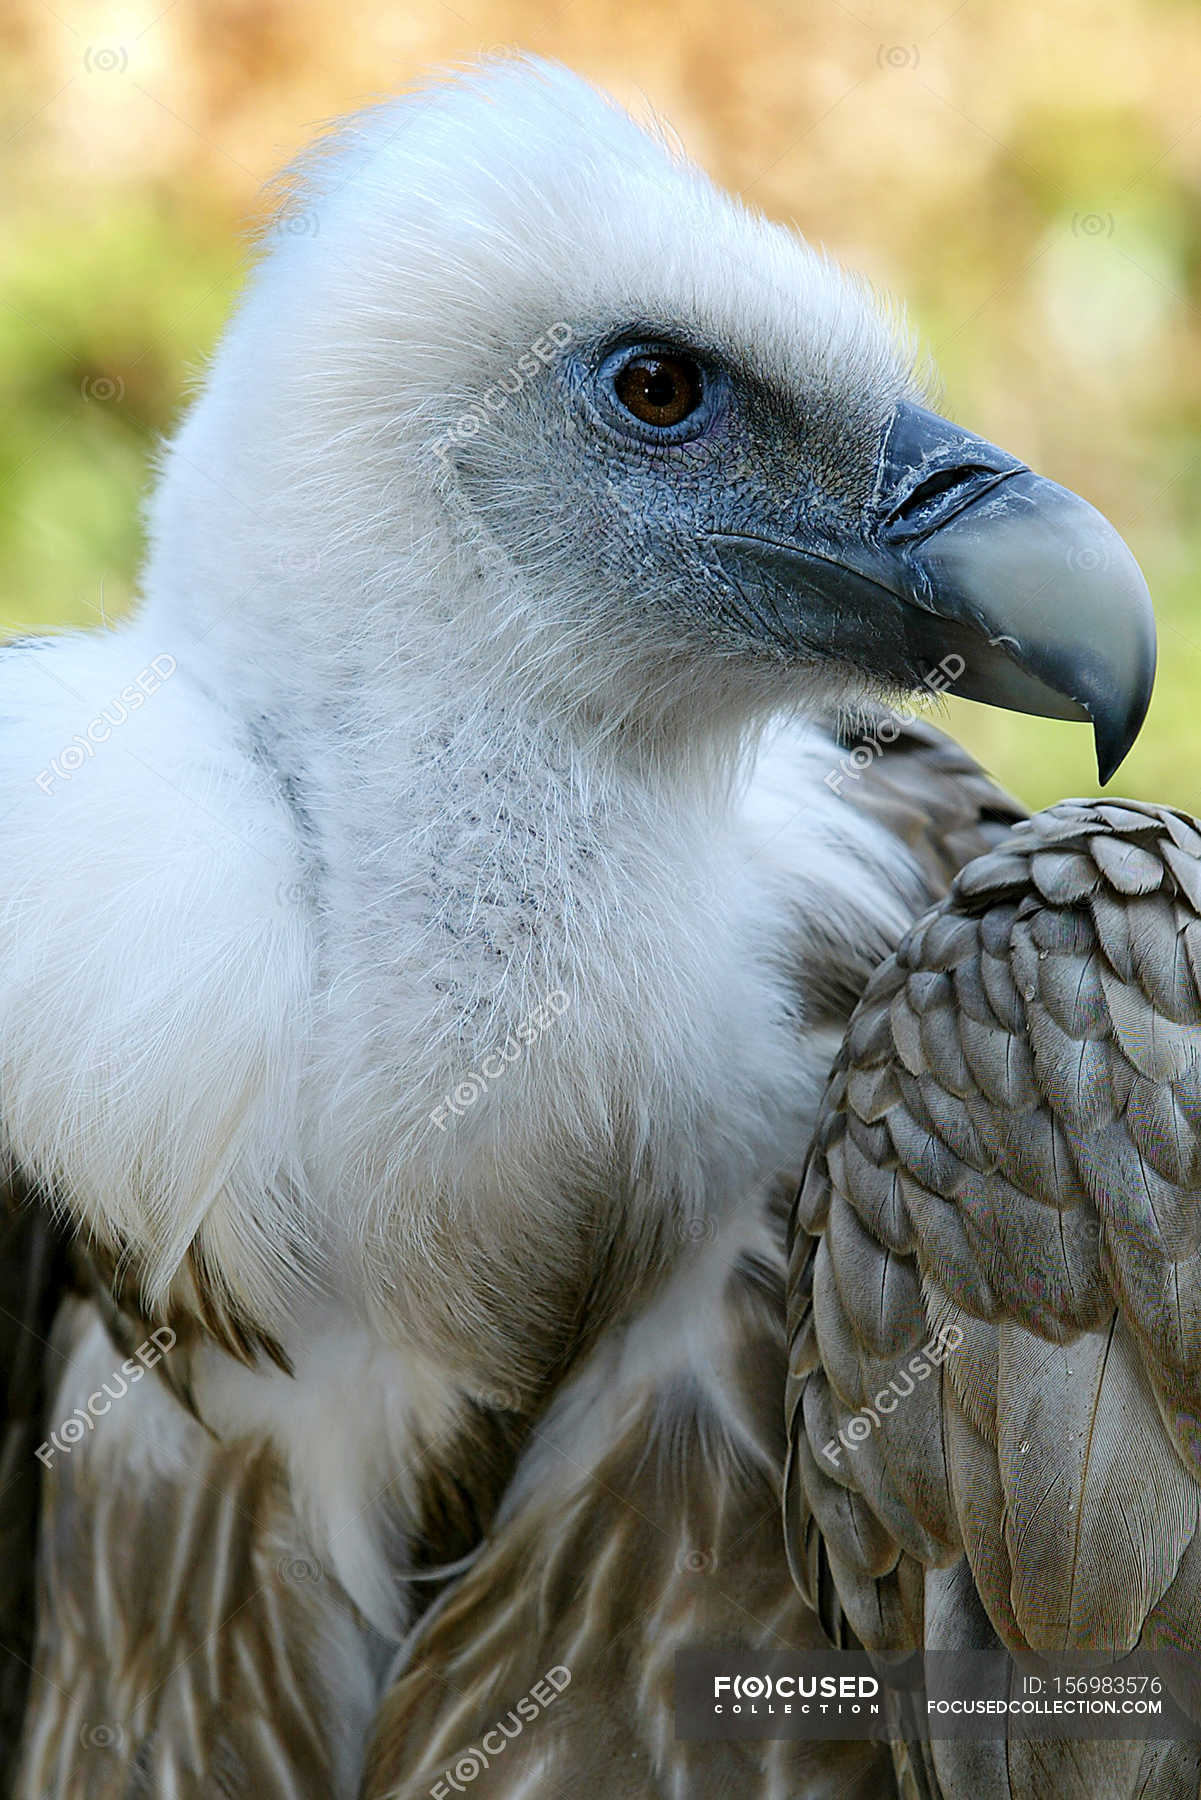 Wild vulture outdoors — Stock Photo | #156983576